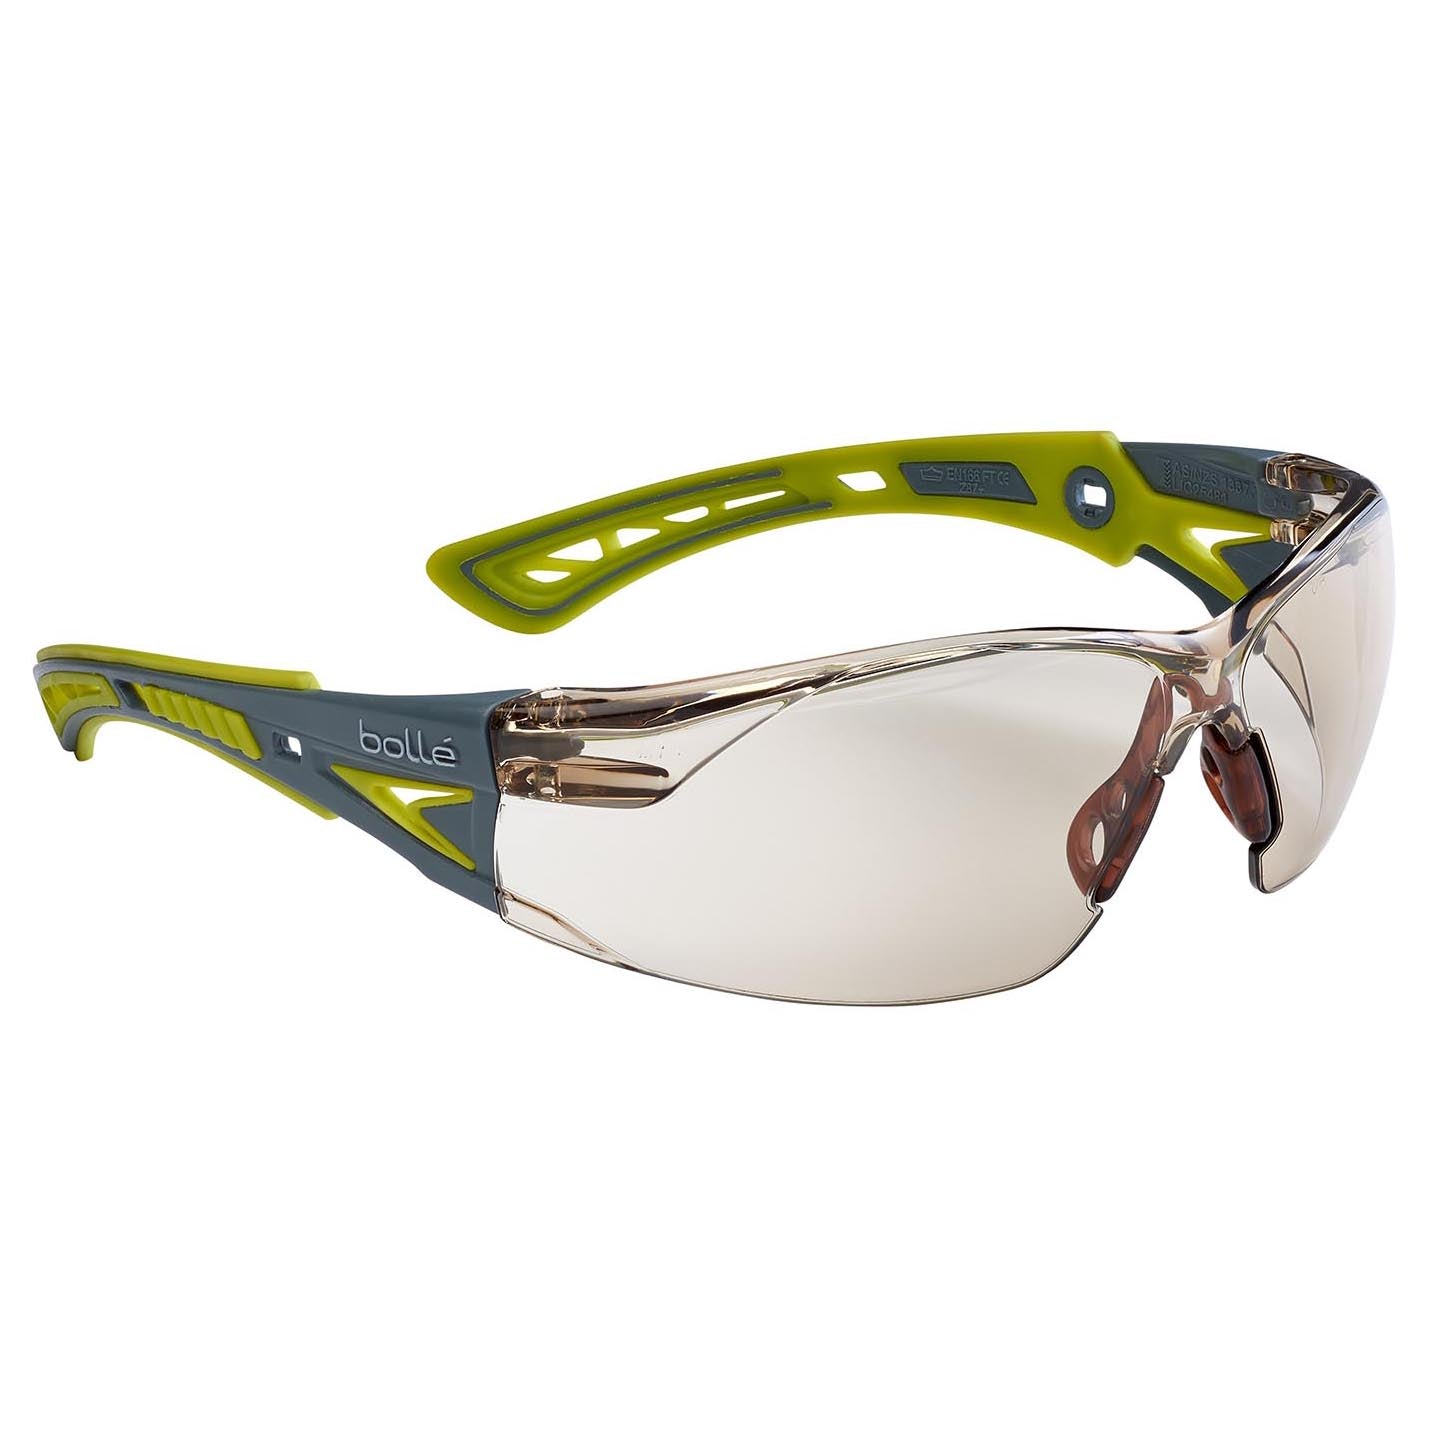 Bolle RUSH+ Small RUSHPSCSPL Safety Glasses Grey/Yellow Temples CSP Lens